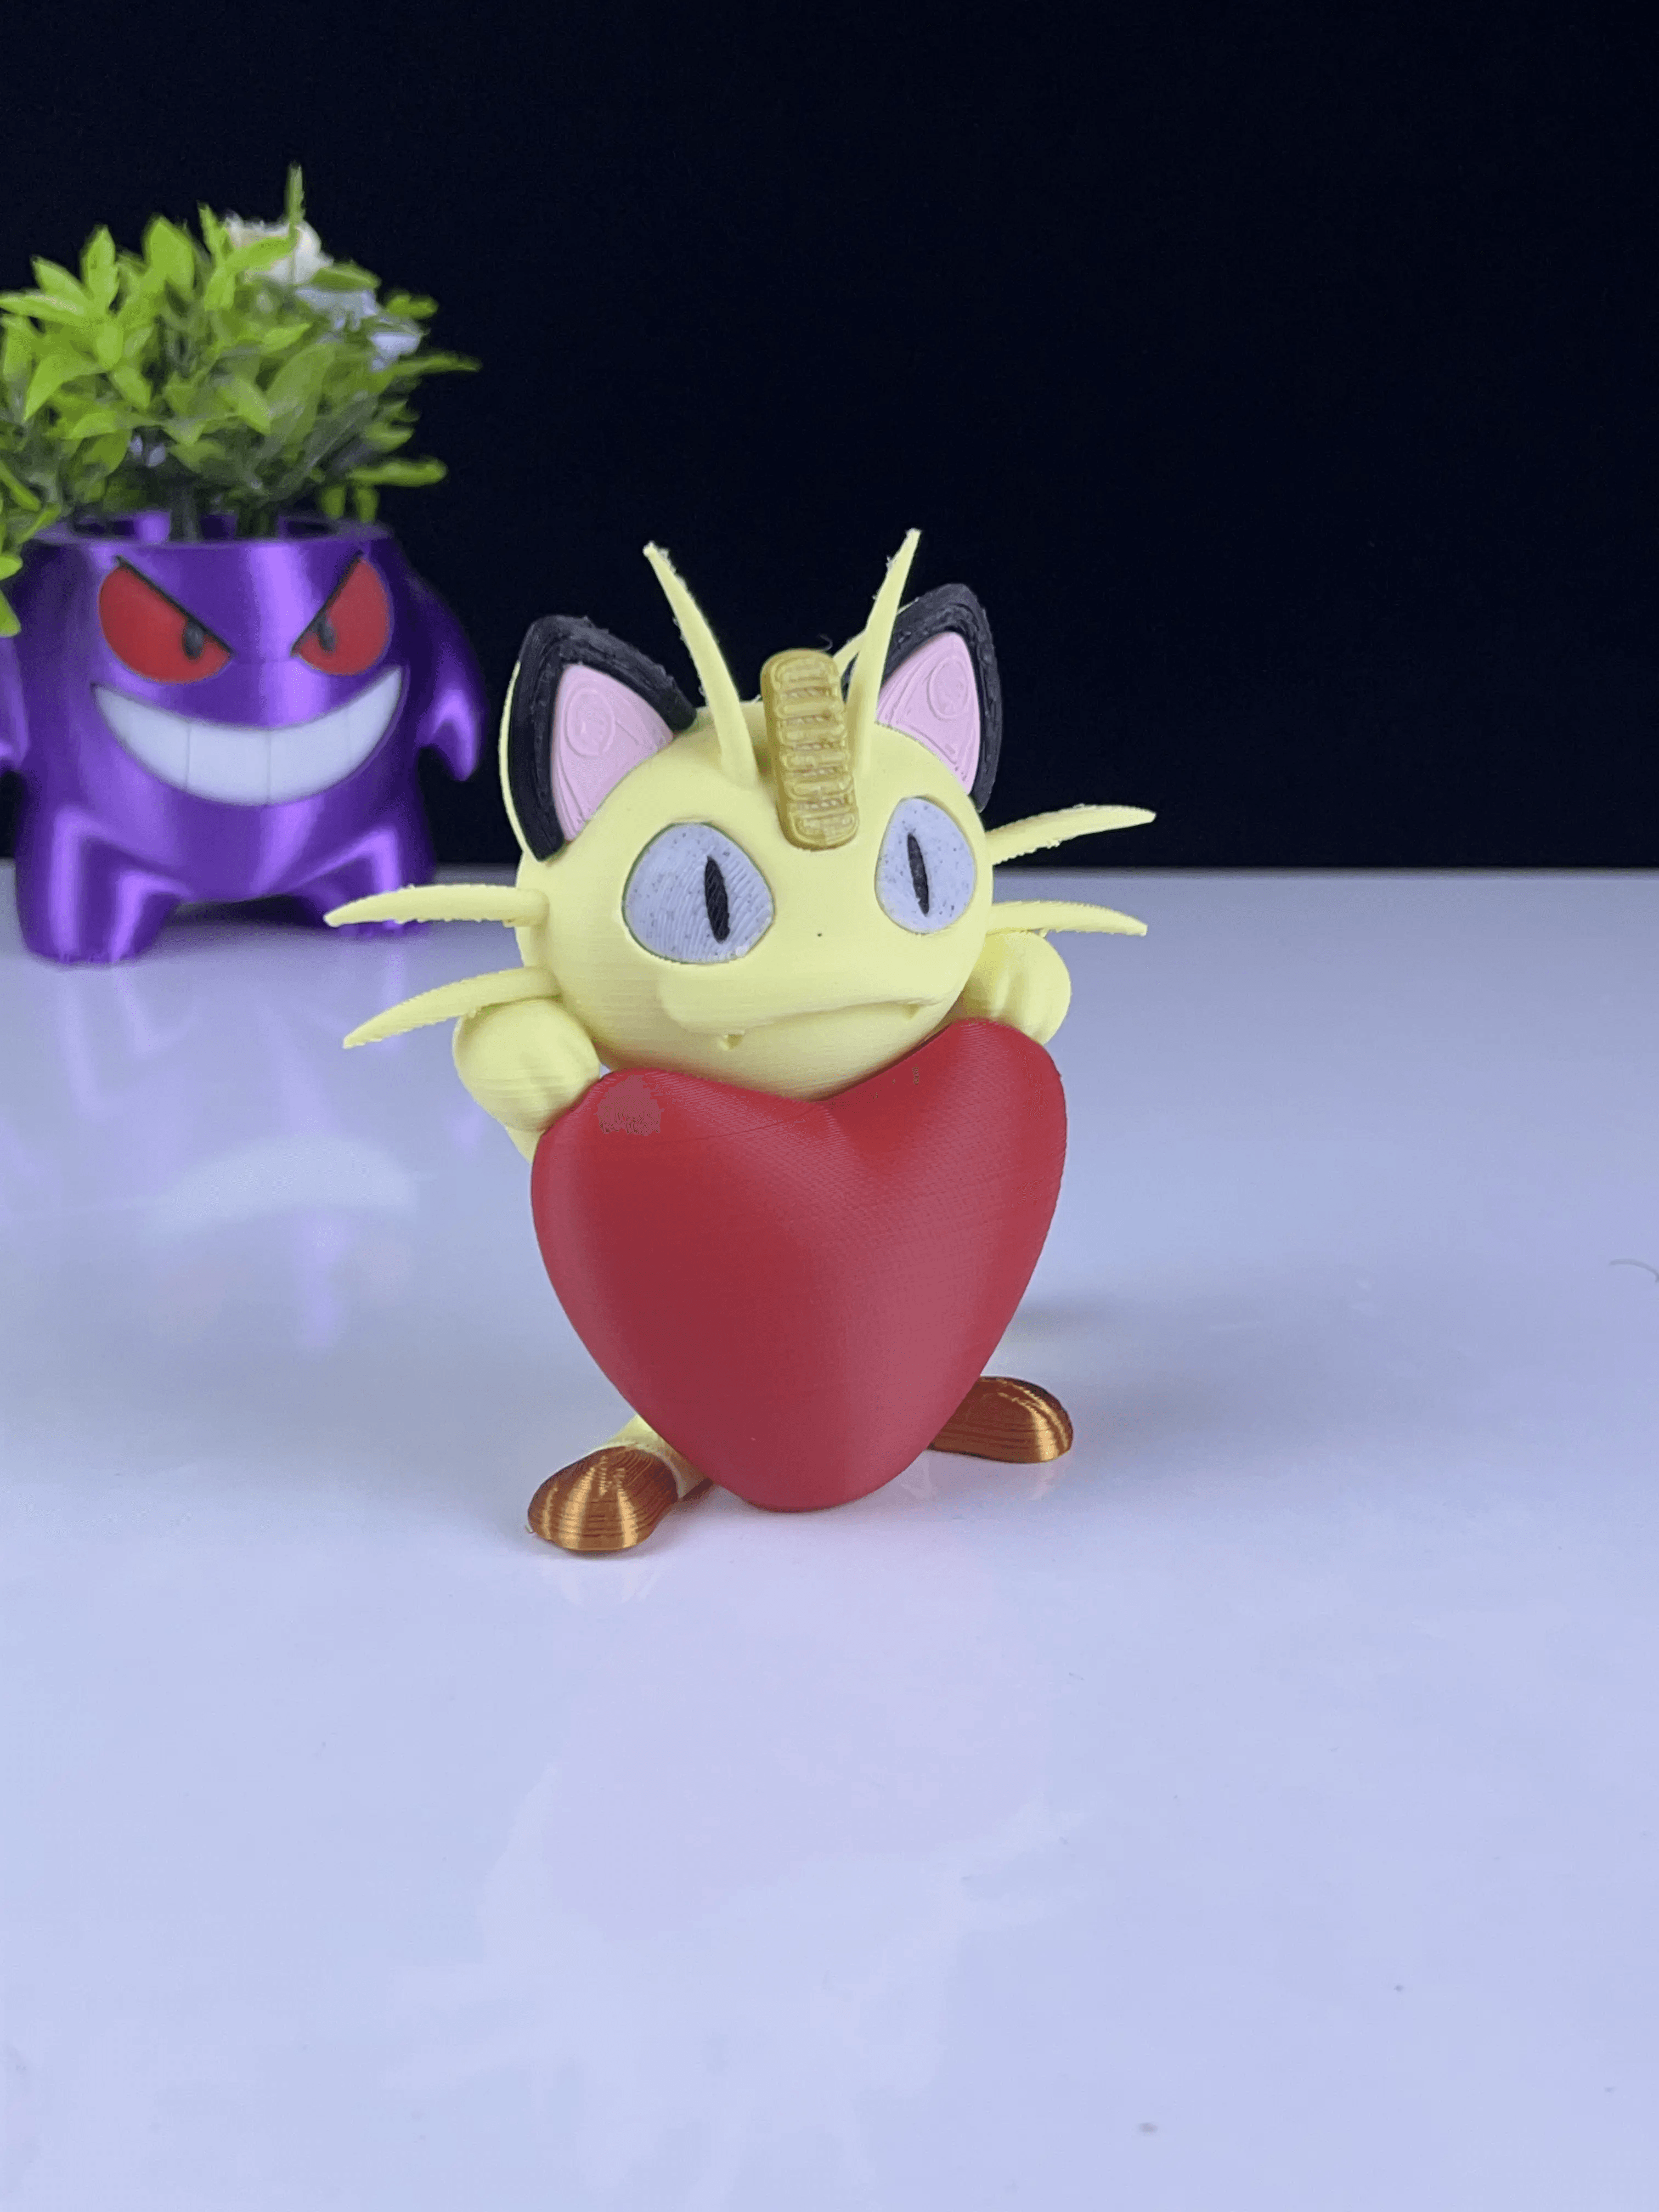 Heartful Meowth Gift for your Wife / Husband - Multipart 3d model